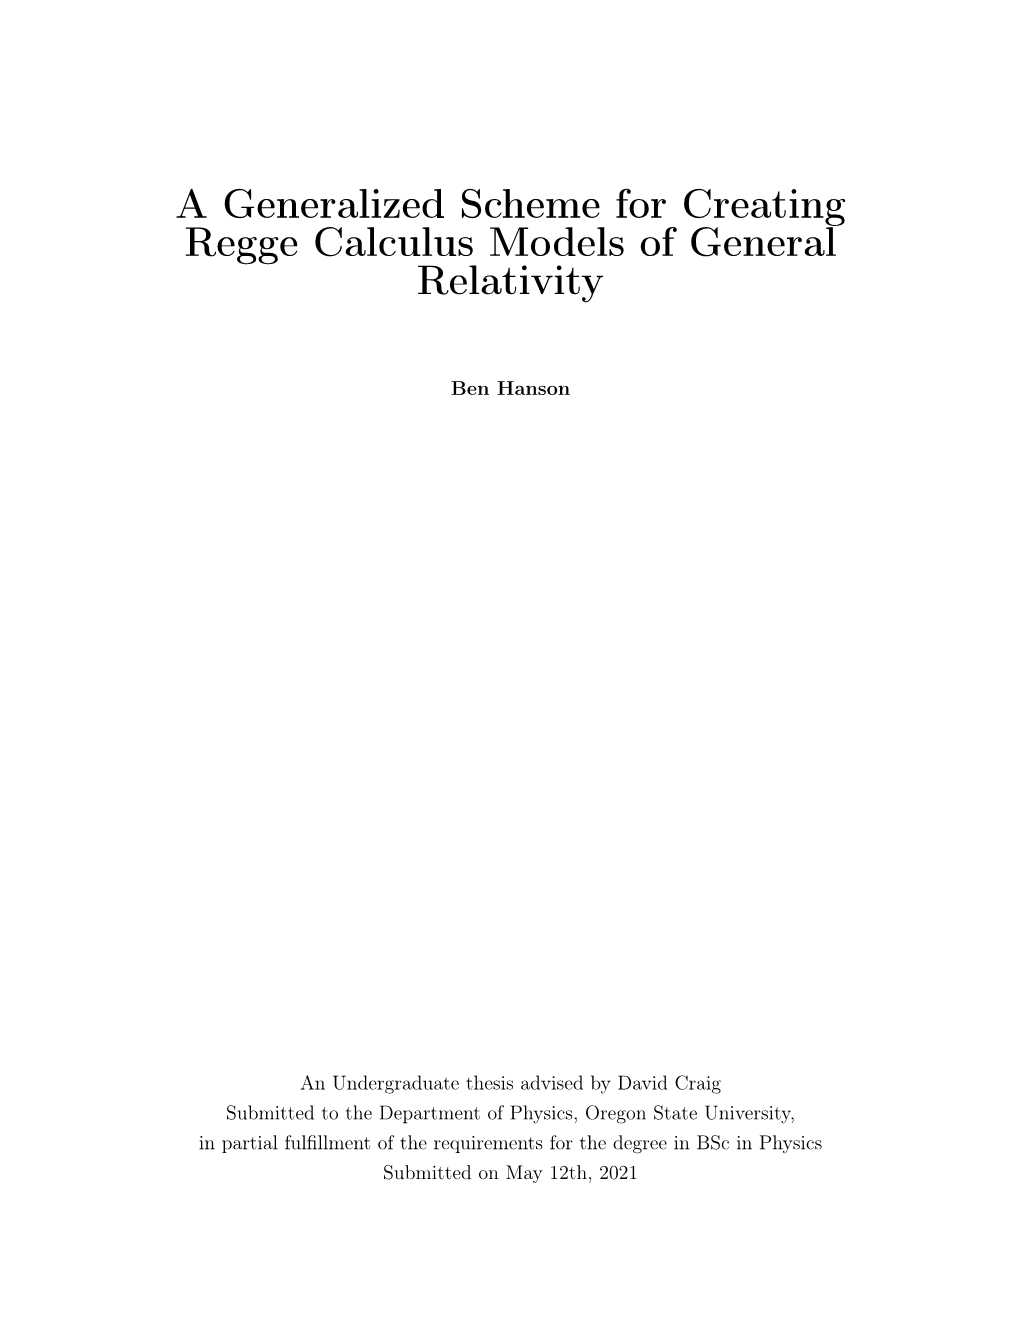 A Generalized Scheme for Creating Regge Calculus Models of General Relativity